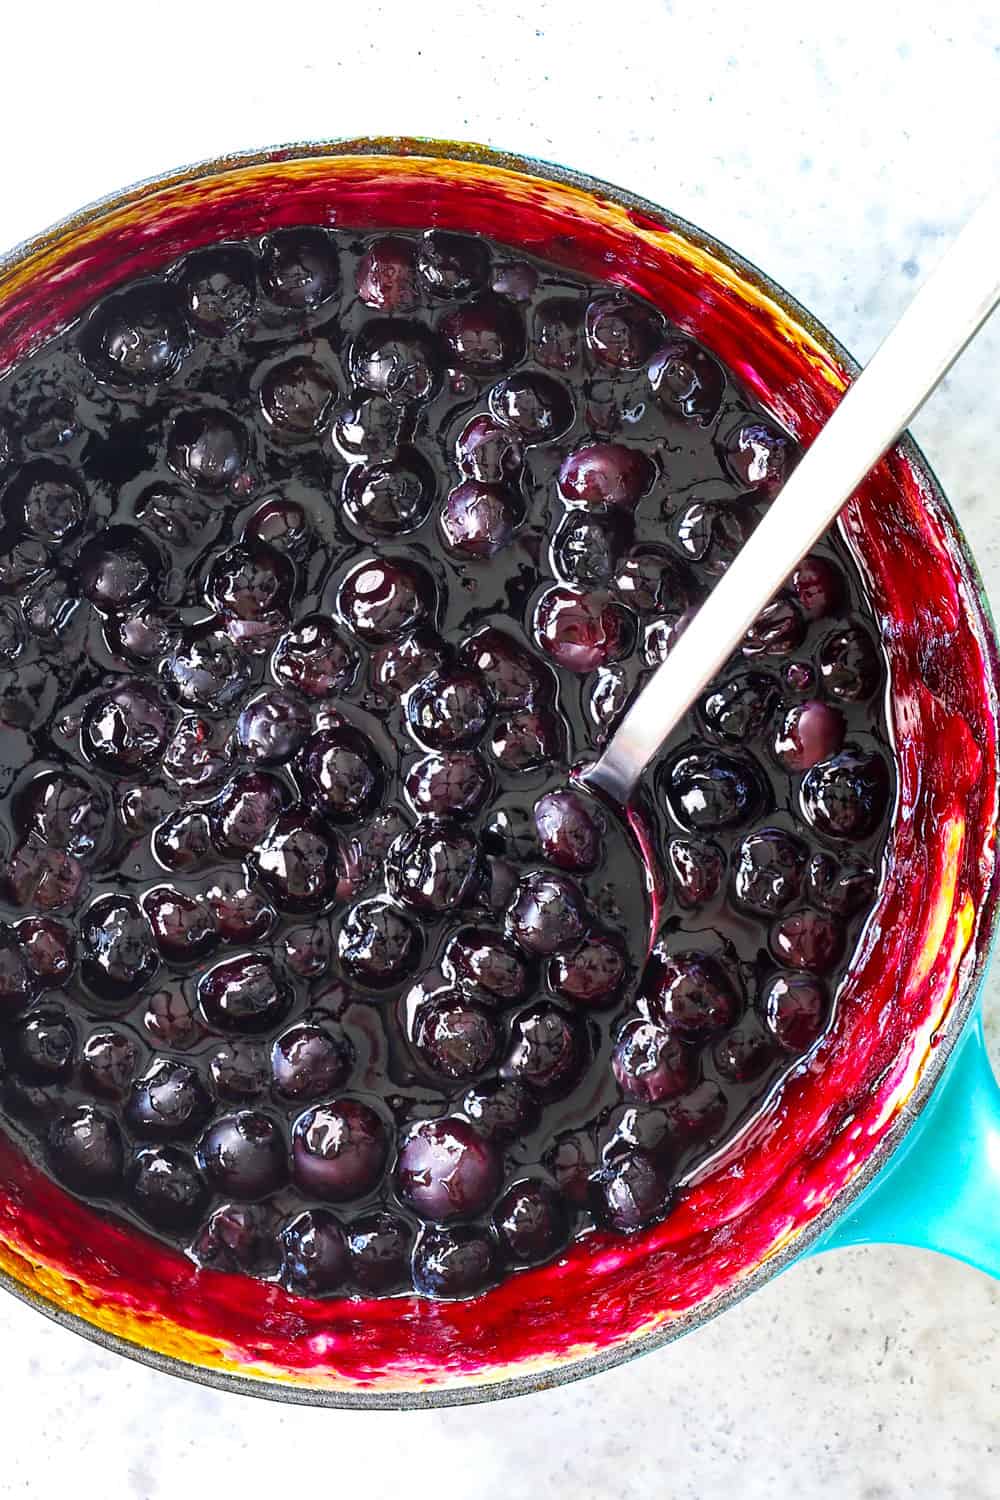 showing how to make fresh blueberry sauce by simmering blueberries with sugar, cornstarch, orange juice and lemon juice